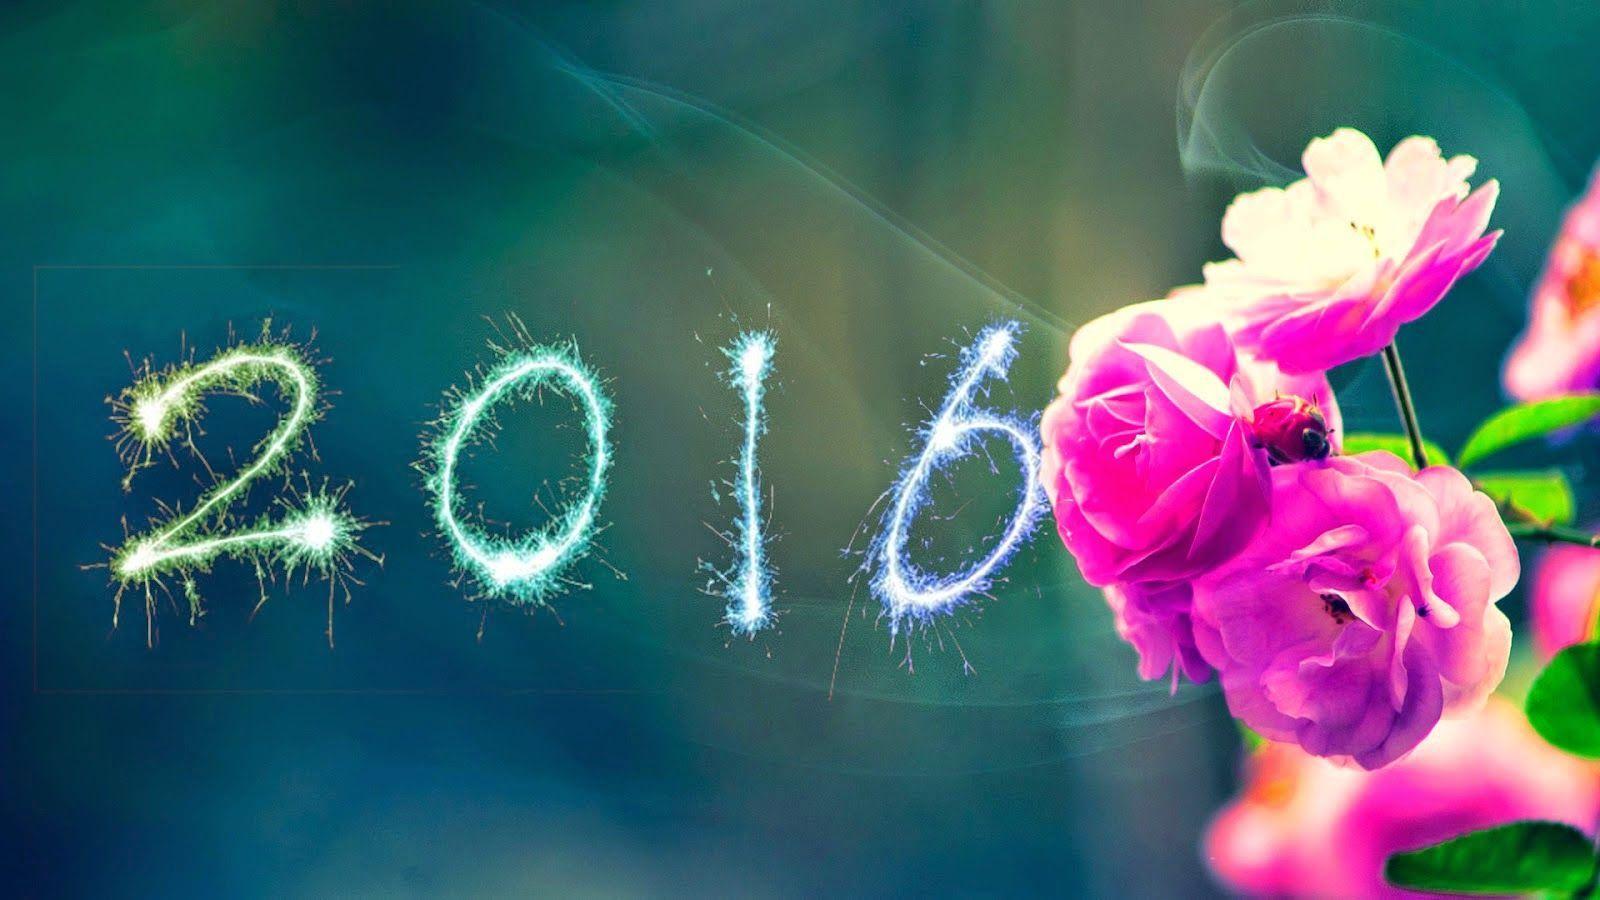 2016} Happy New Year HD Wallpaper and Photo [Free Download]